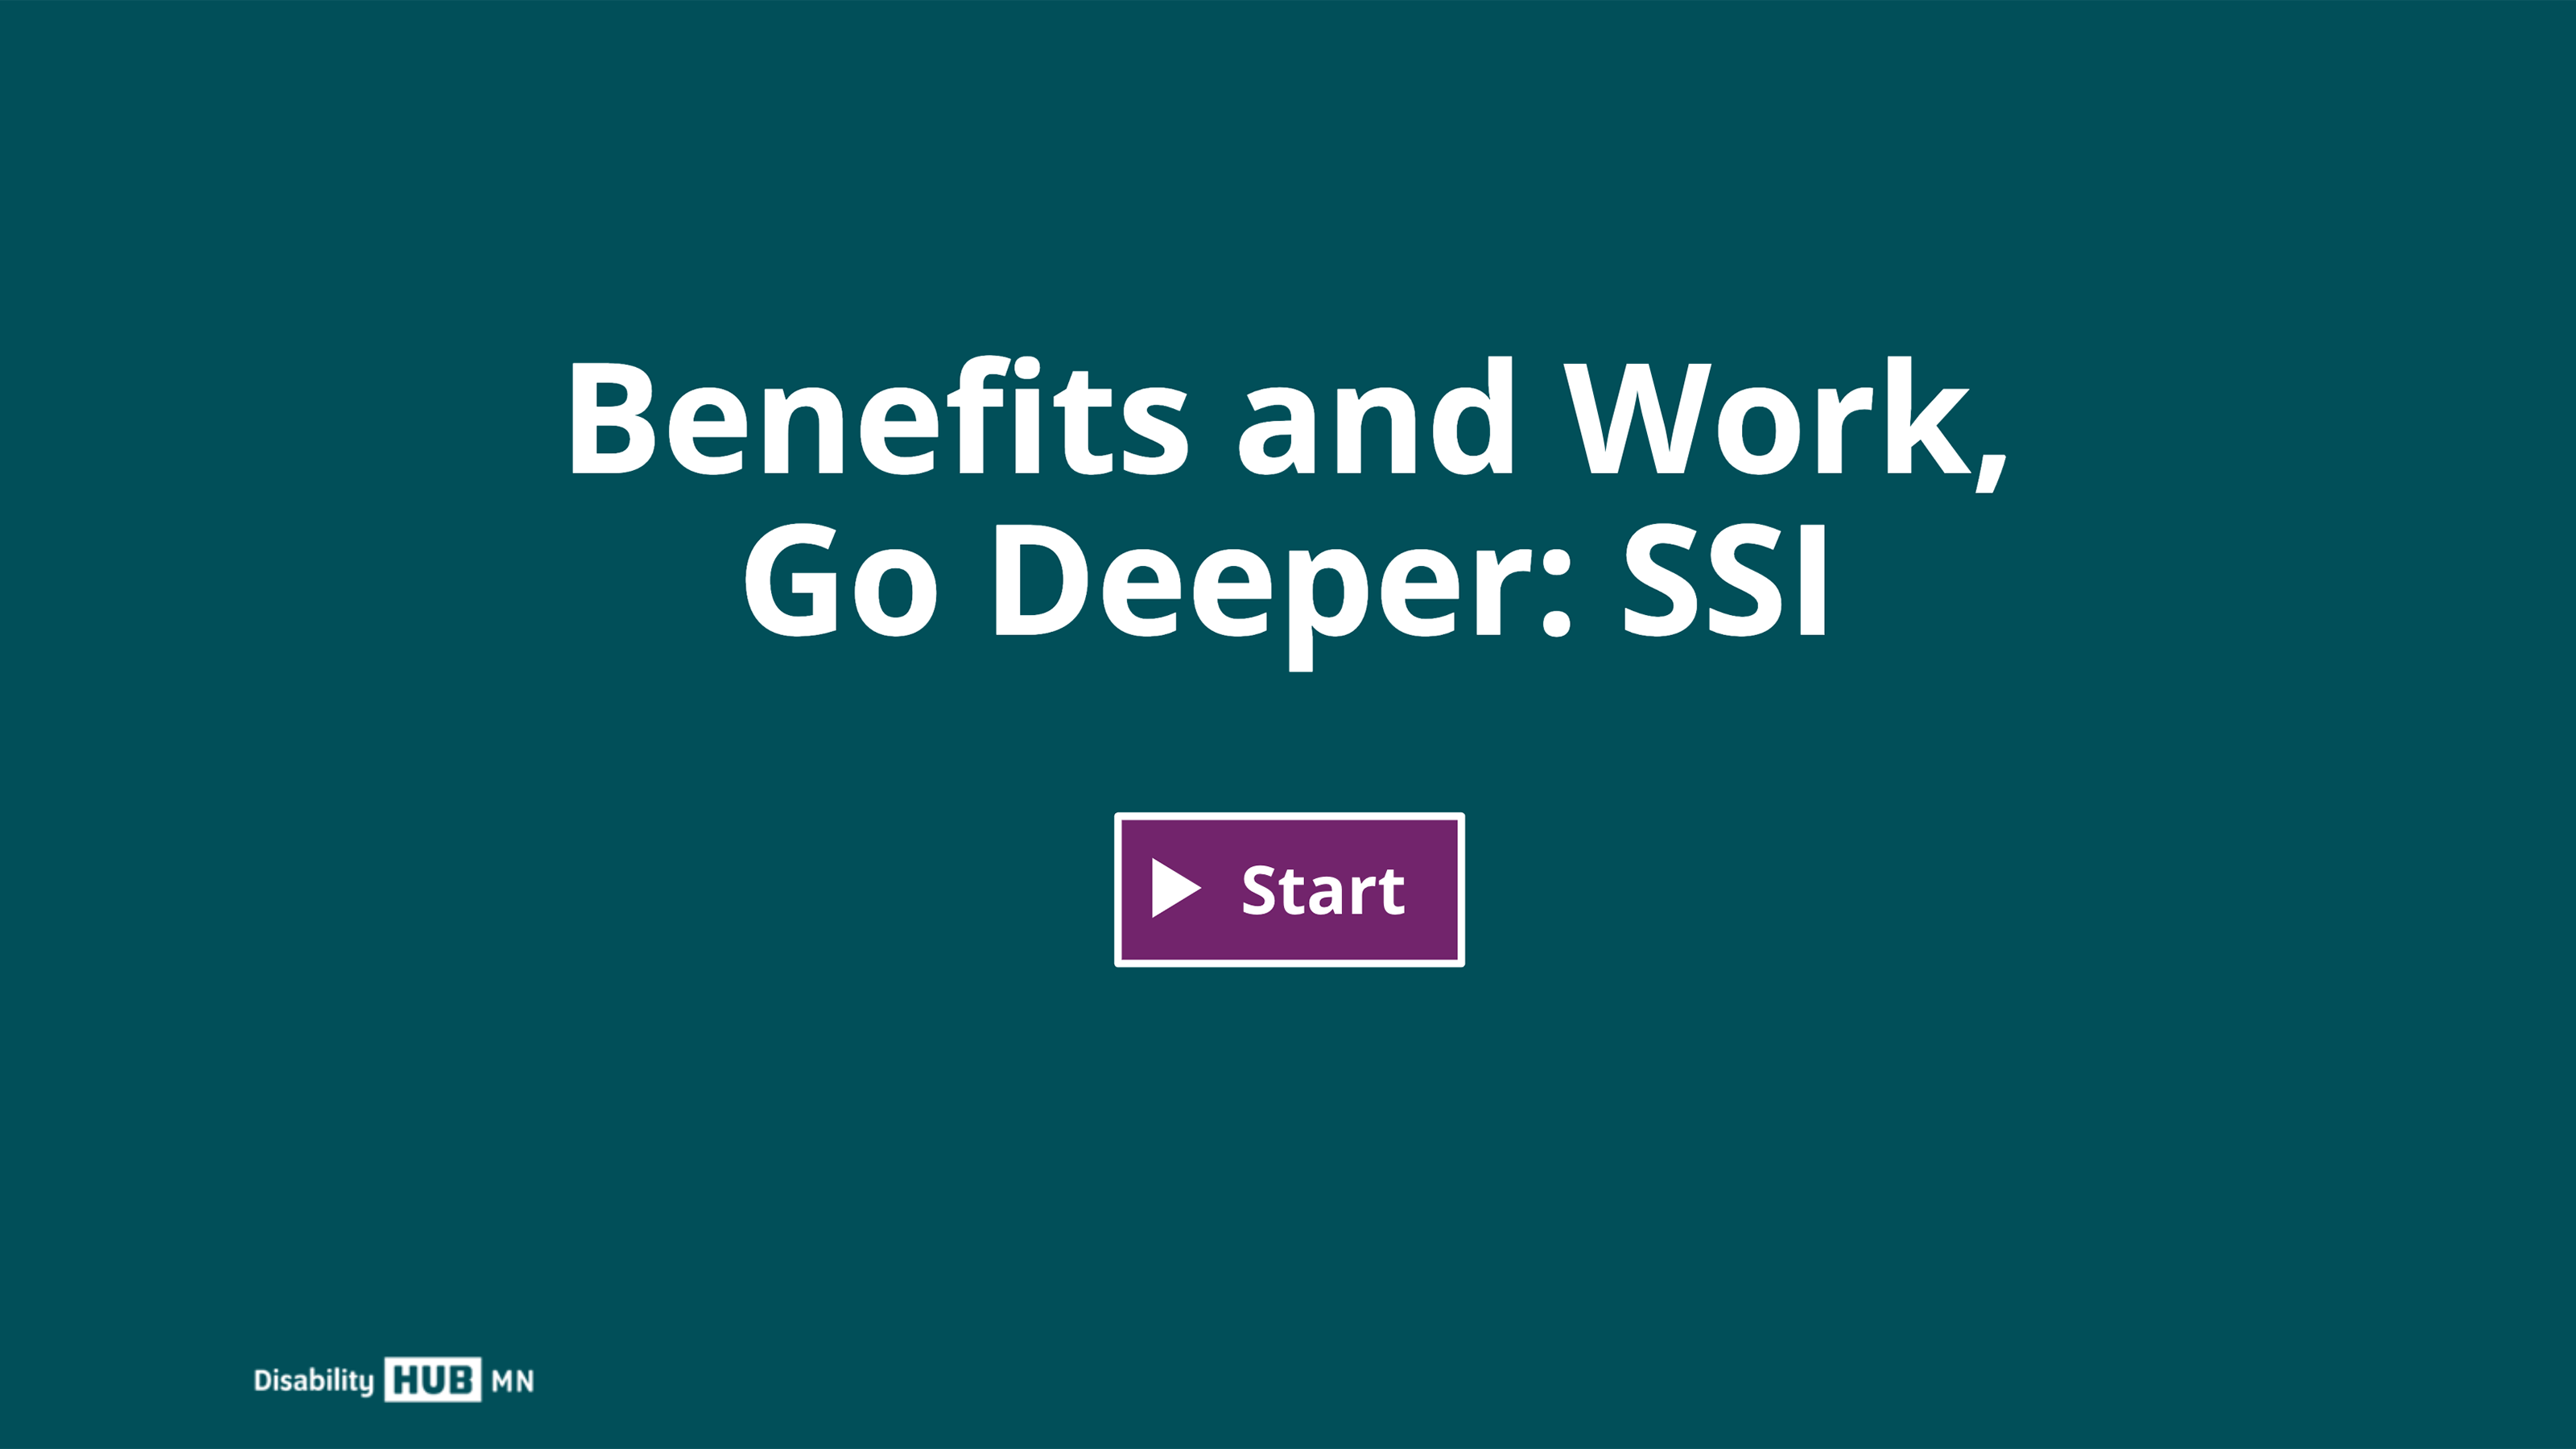 Click this image to begin the Benefits and Work, Go Deeper: SSI e-learning